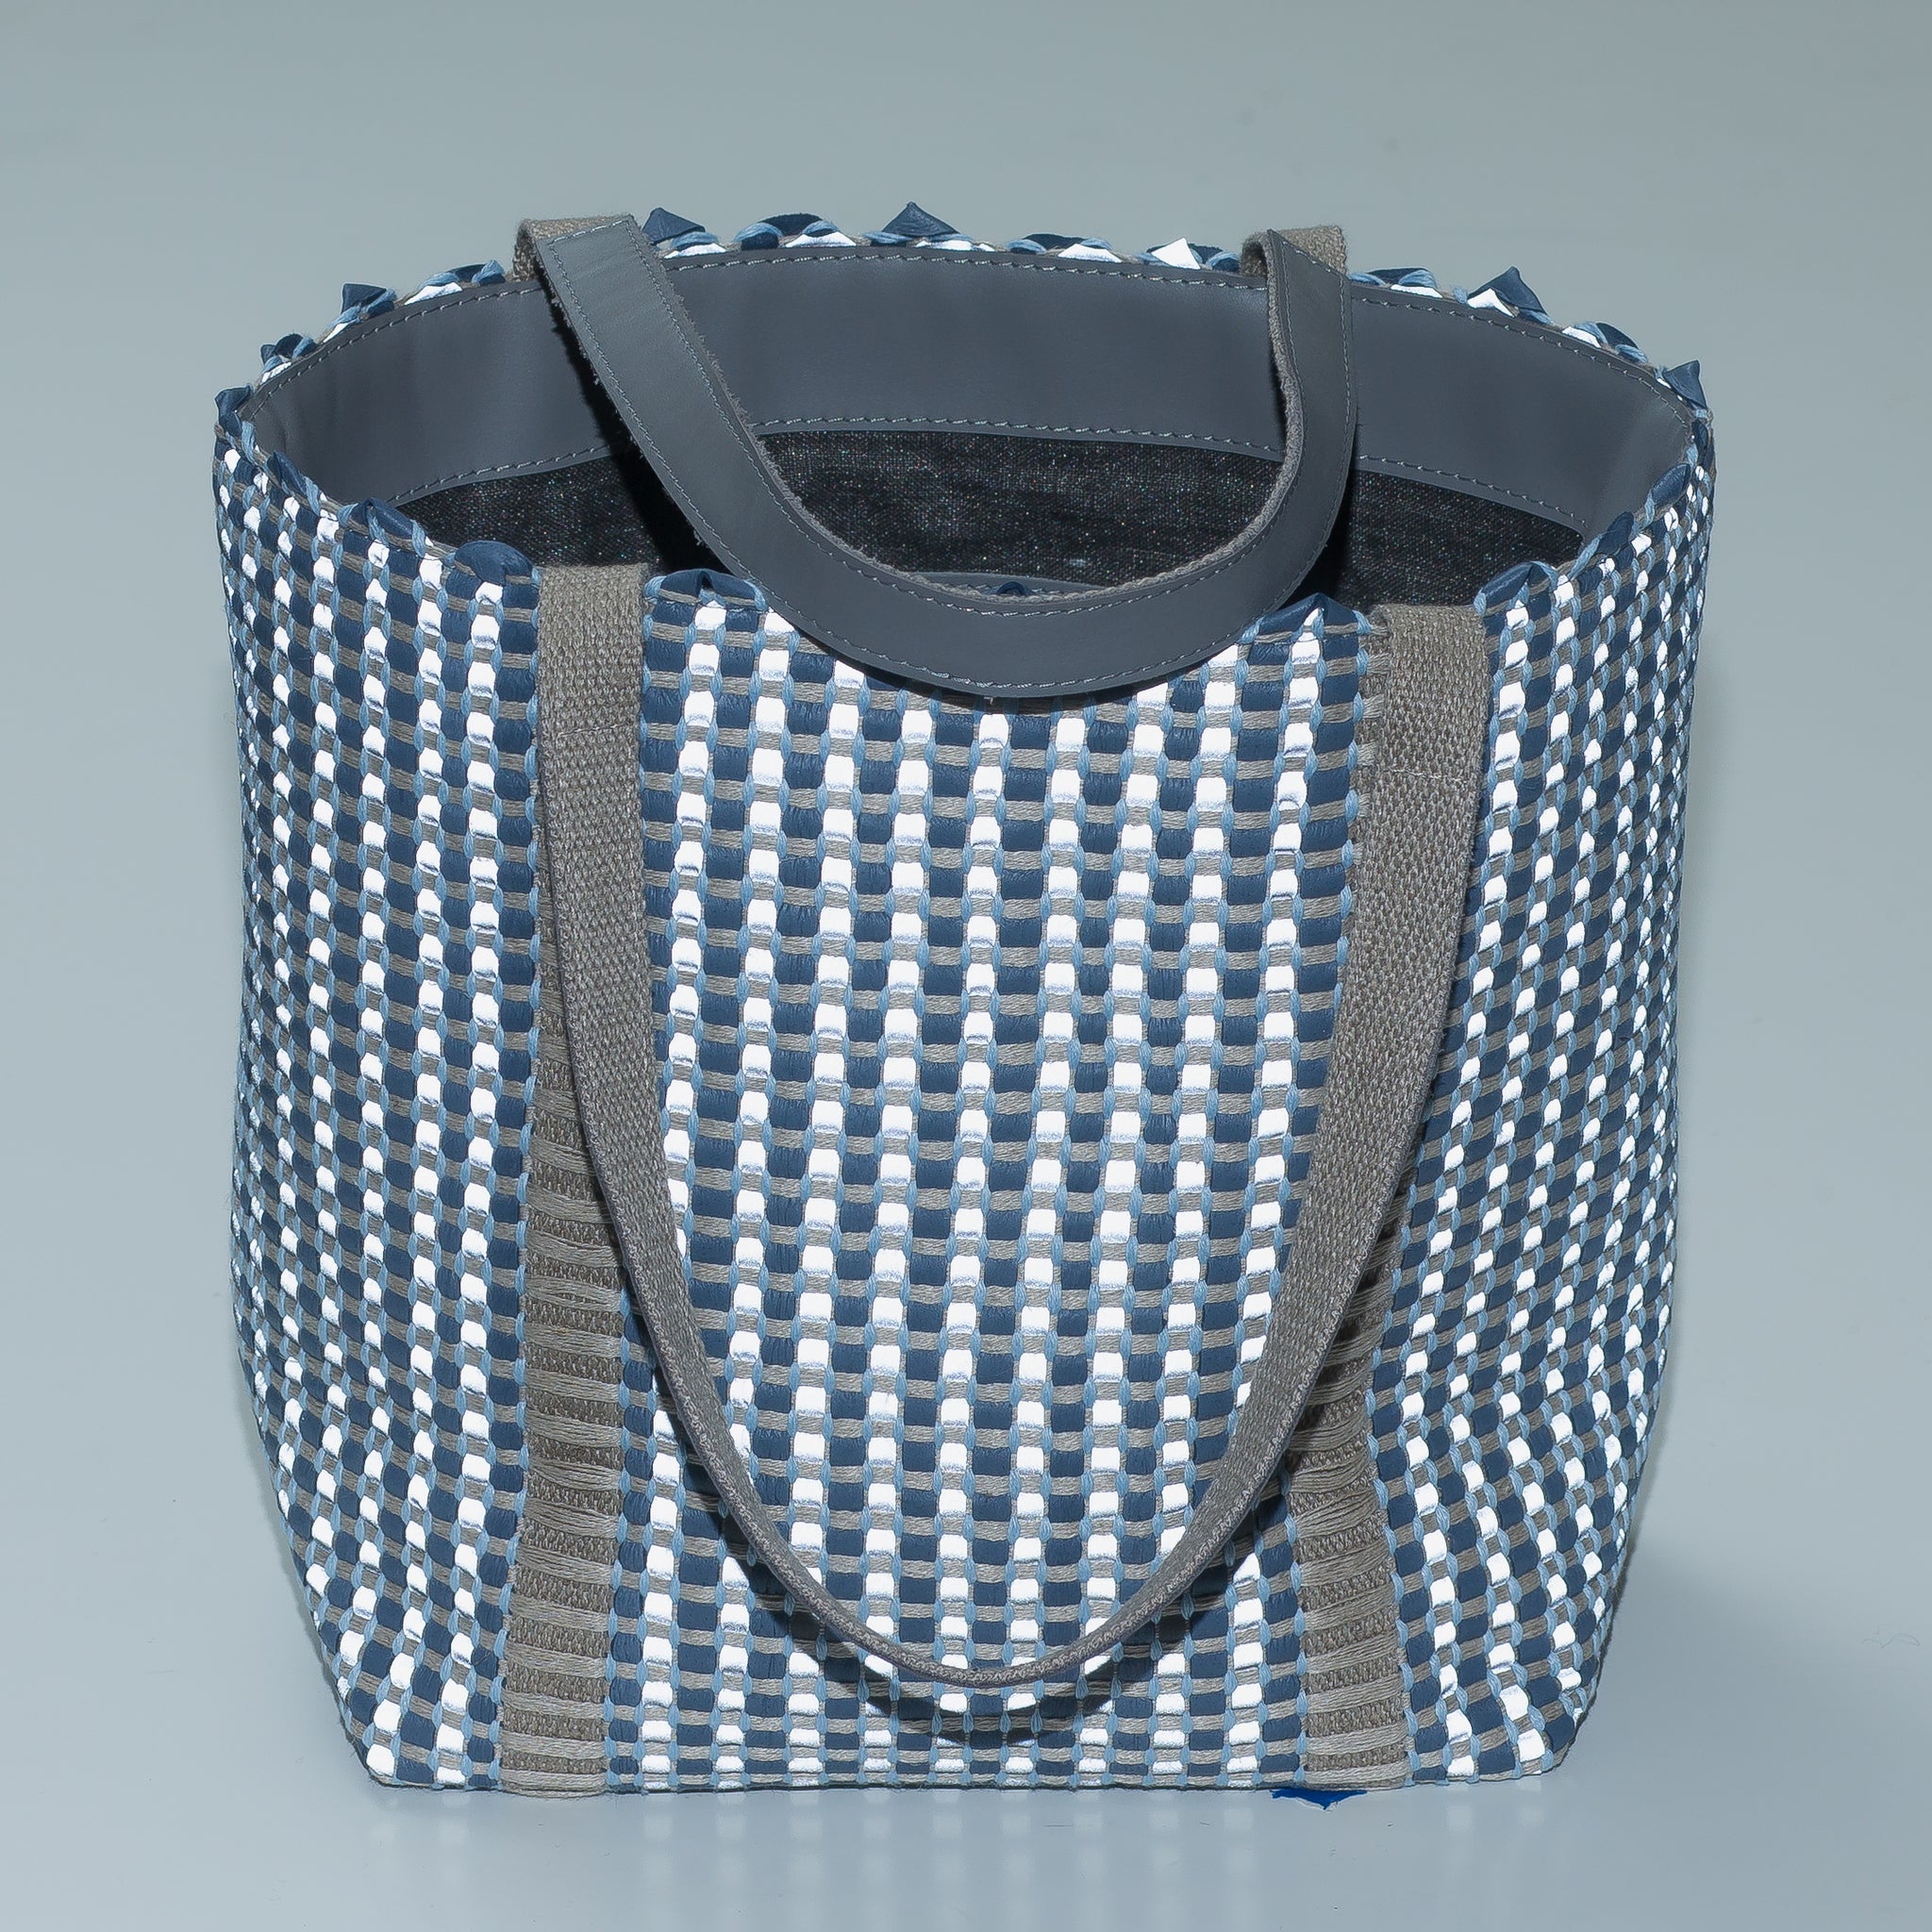 Handwoven Bag AUSTE #20 blue leather and reflective